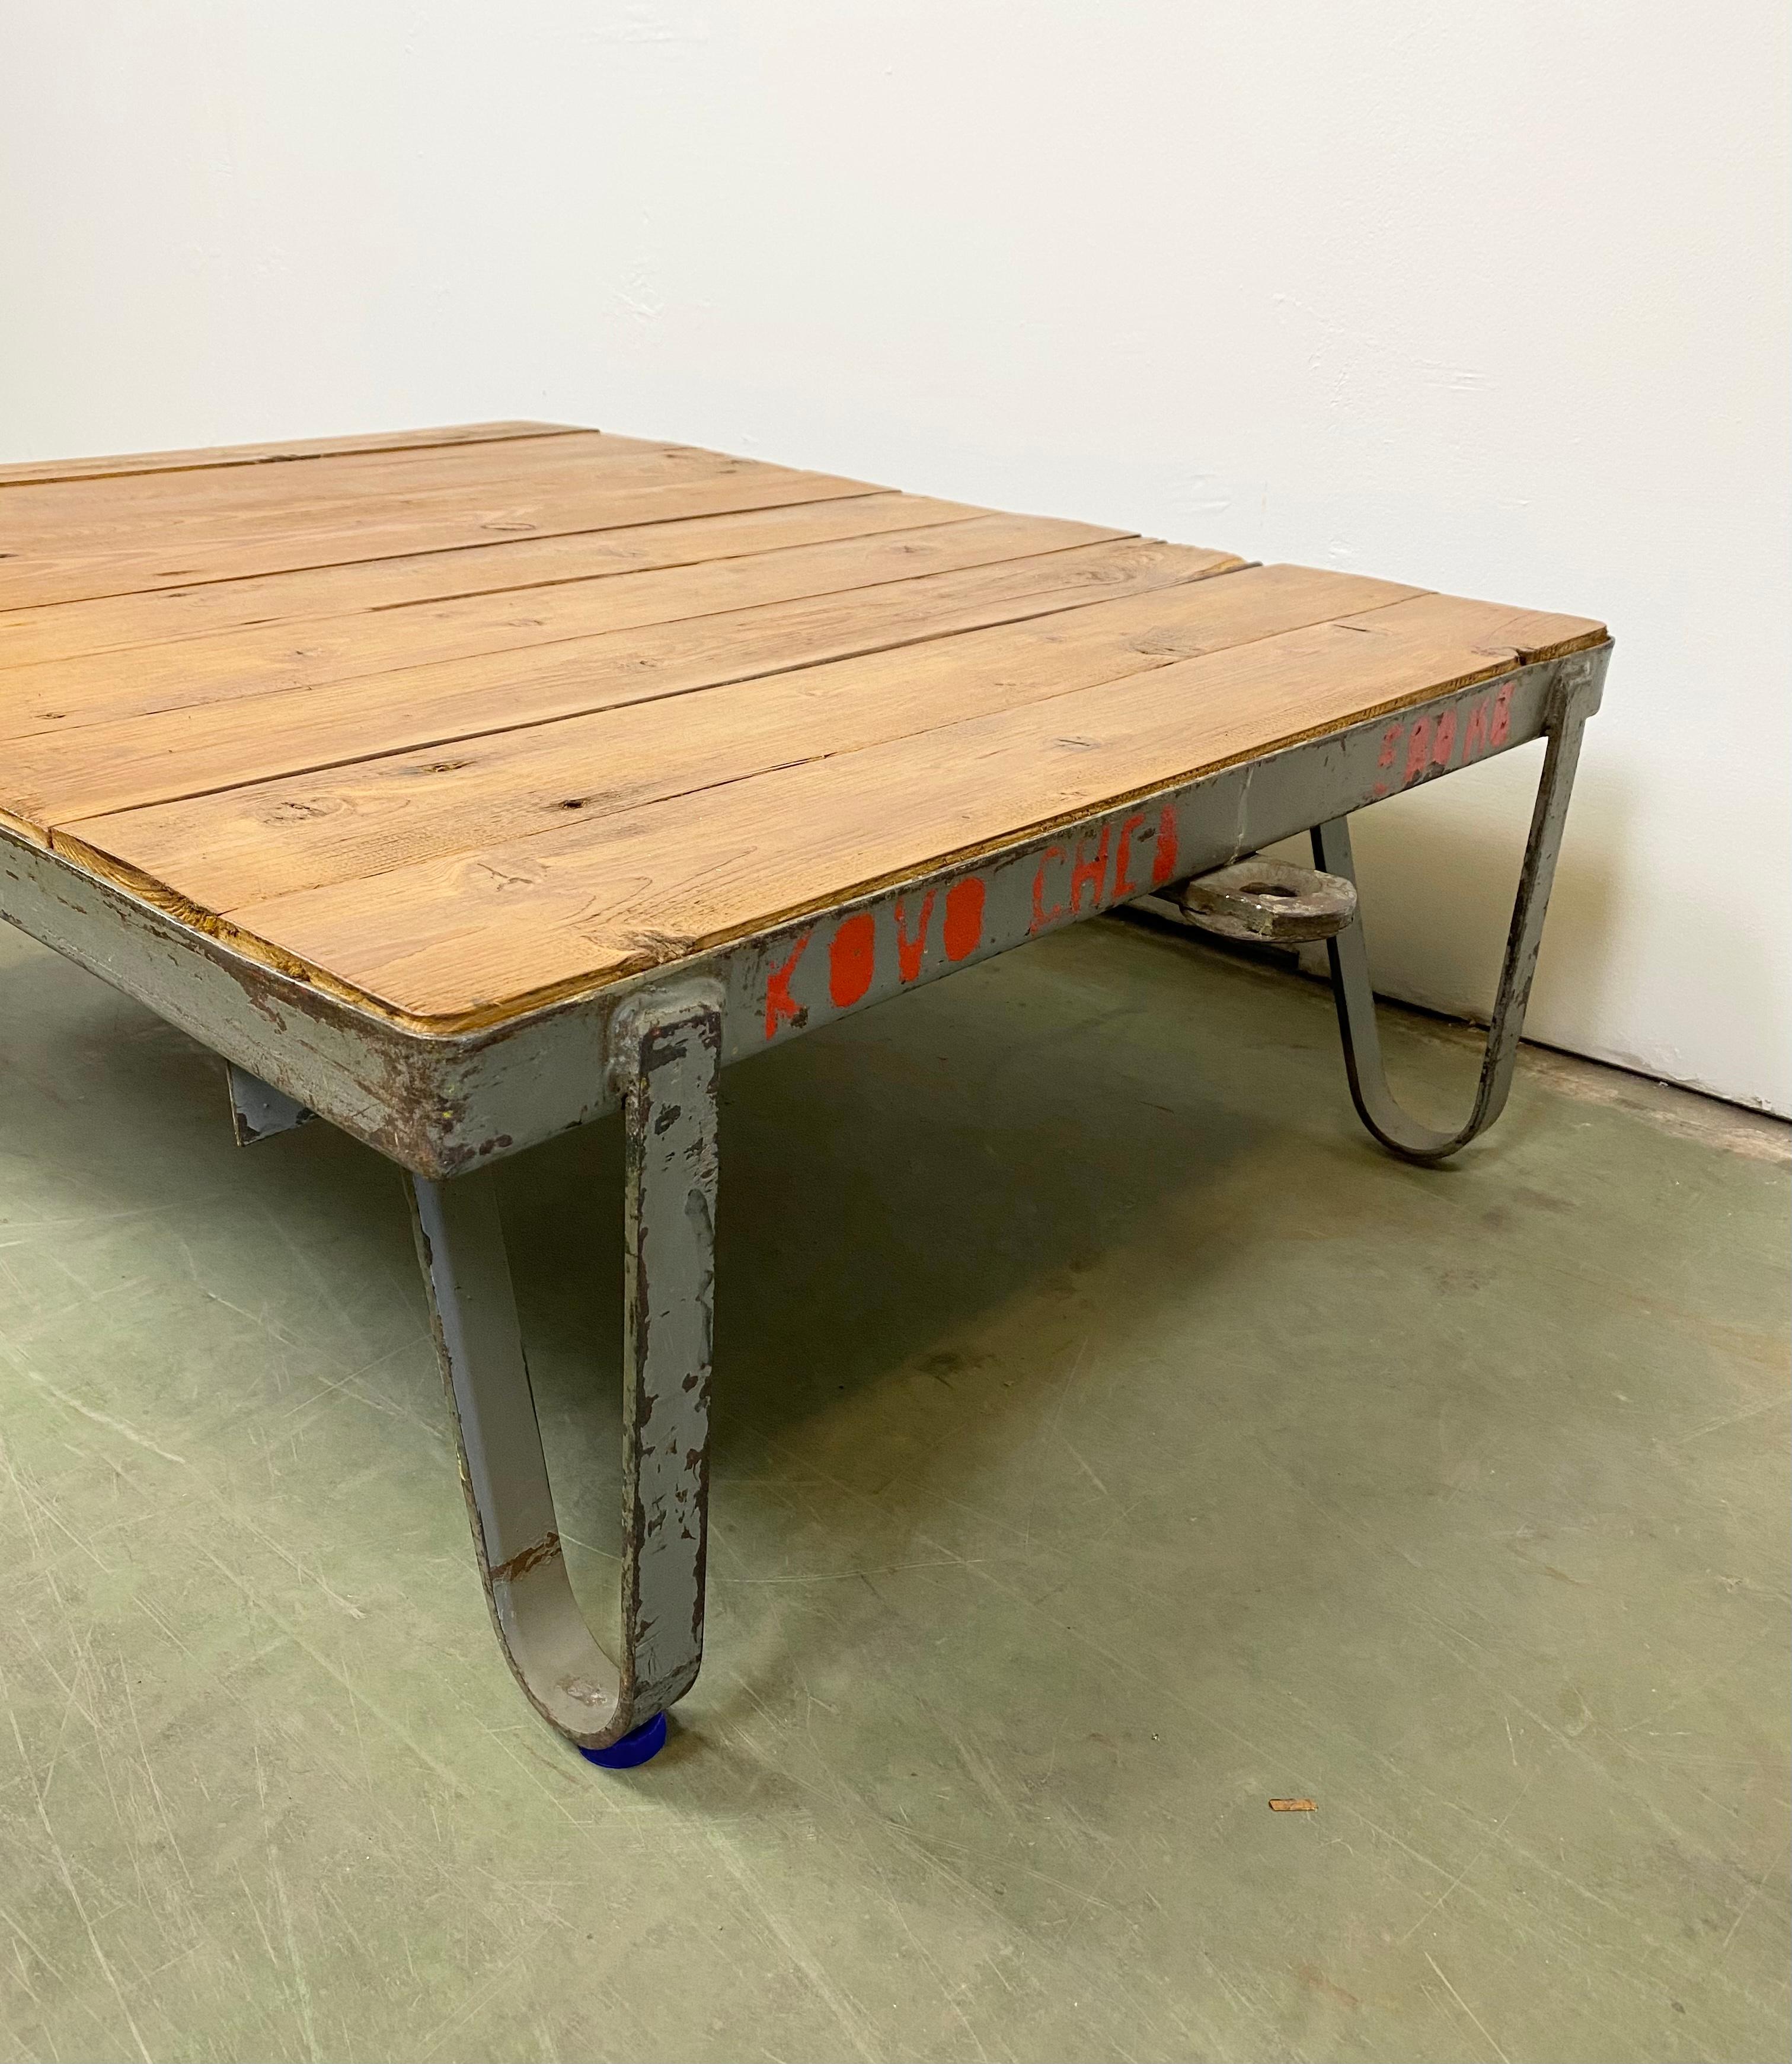 Former pallet truck from a factory now serves as a coffee table. It features a grey iron construction with two wheels and a solid wooden plate. The weight of the table is 30 kg.